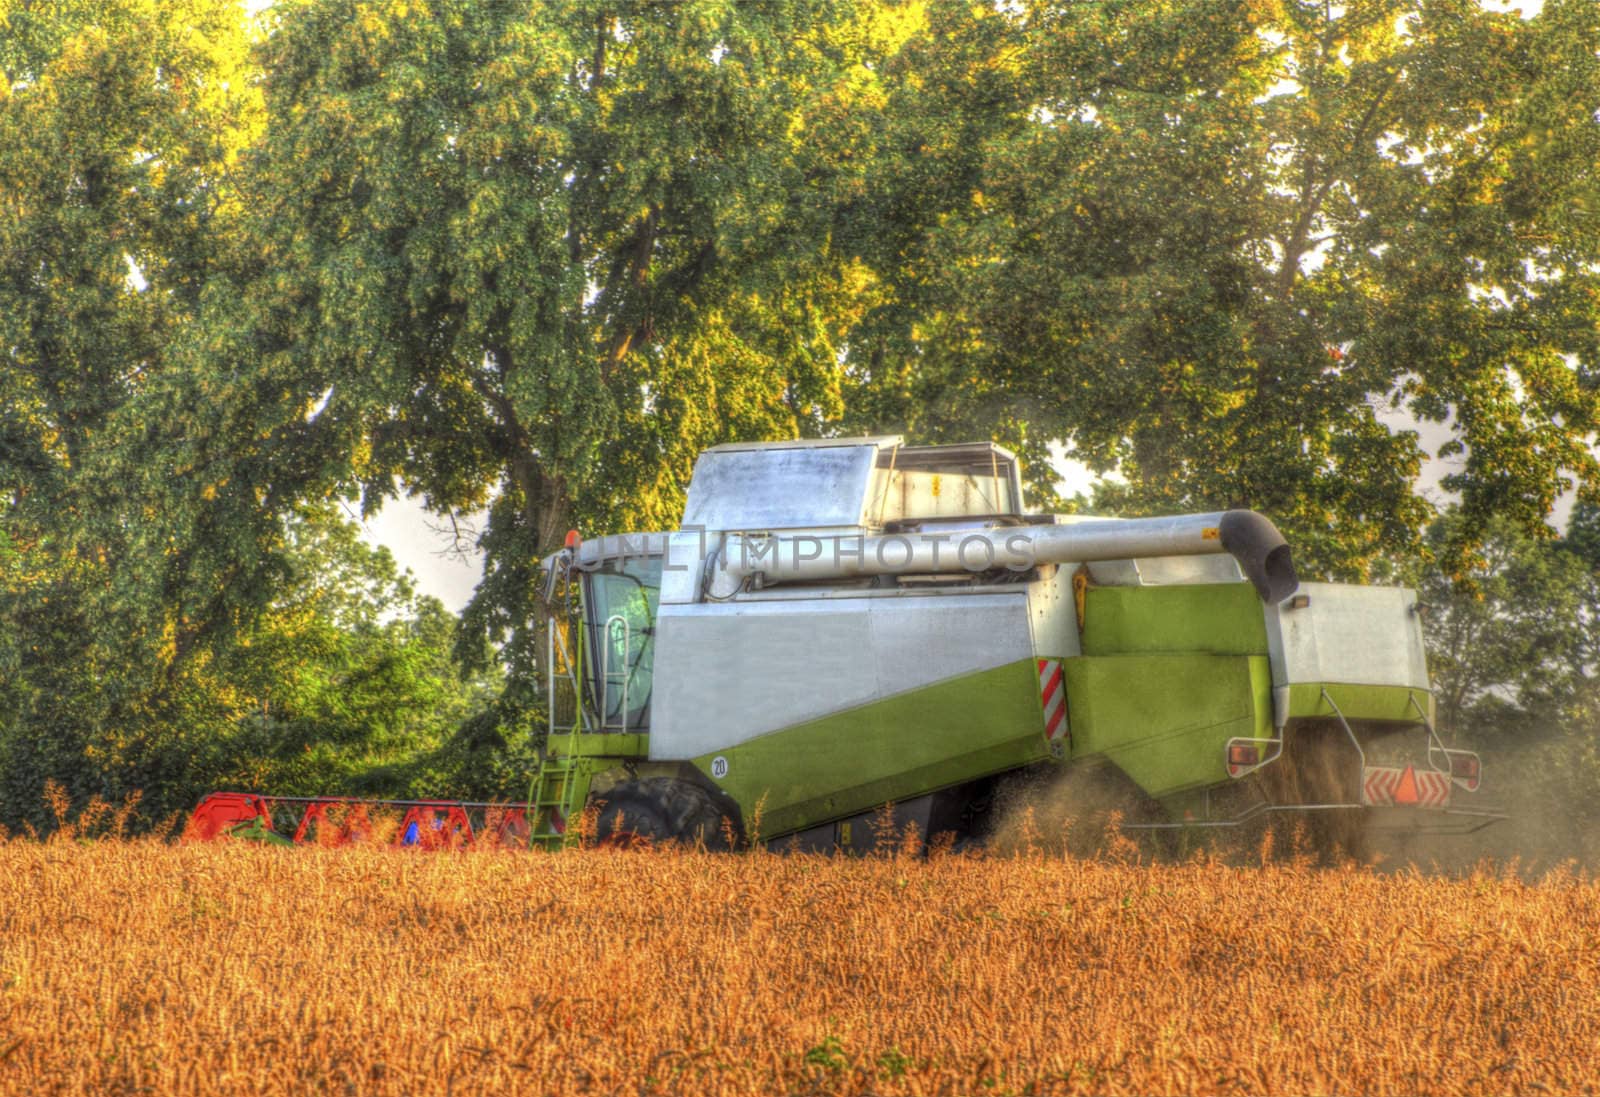 This photo present harvester collects corn on the field HDR.